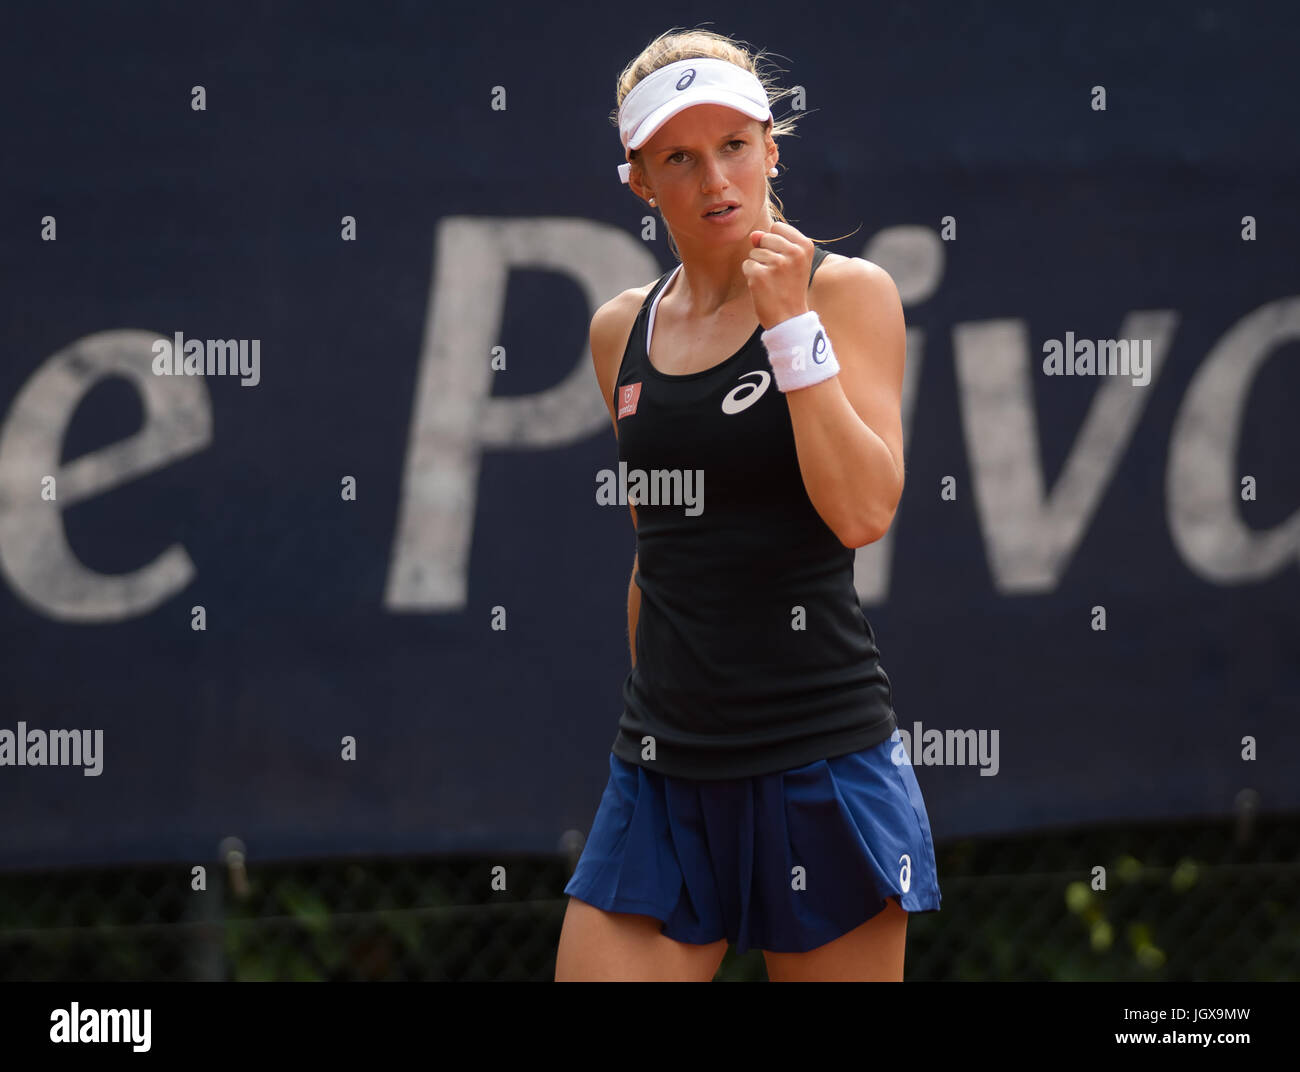 Versmold, Germany. 11 July, 2017. Barbara Haas at the 2017 Reinert Open ITF $60 tennis tournament © Jimmie48 Photography/Alamy Live News Stock Photo